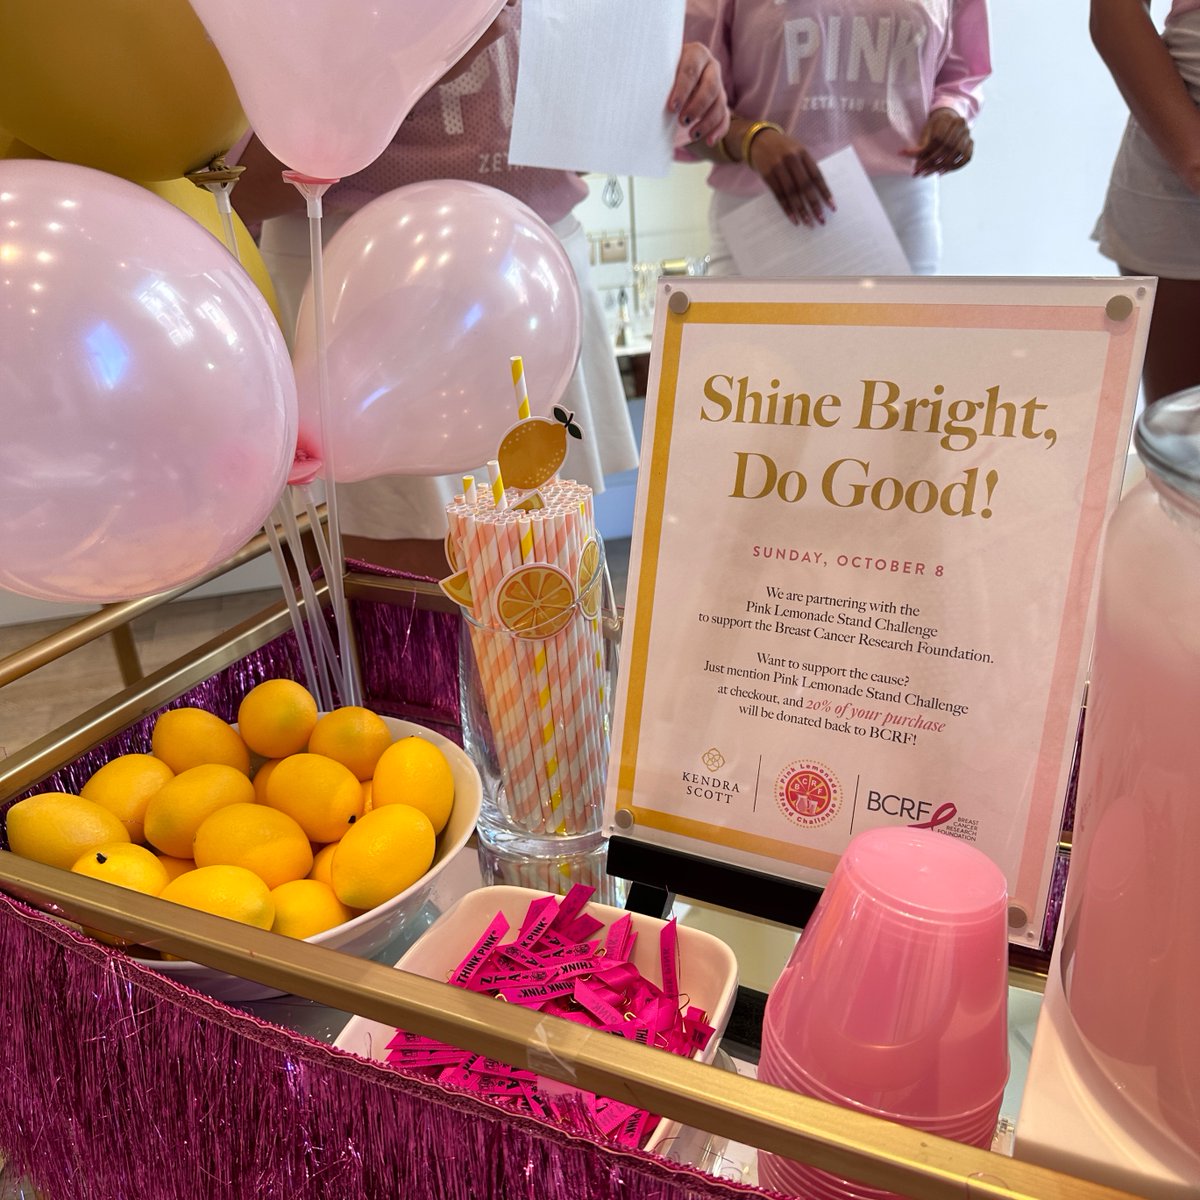 #MakeAStandMonday brings us another fantastic pop-up event, this time in Baton Rouge, as part of our @KendraScott partnership. 🍋 It's heartwarming to witness stores and communities across the nation uniting on the same day to support the @bcrfcure. 💖 #BCRF #PLSC #ZTA